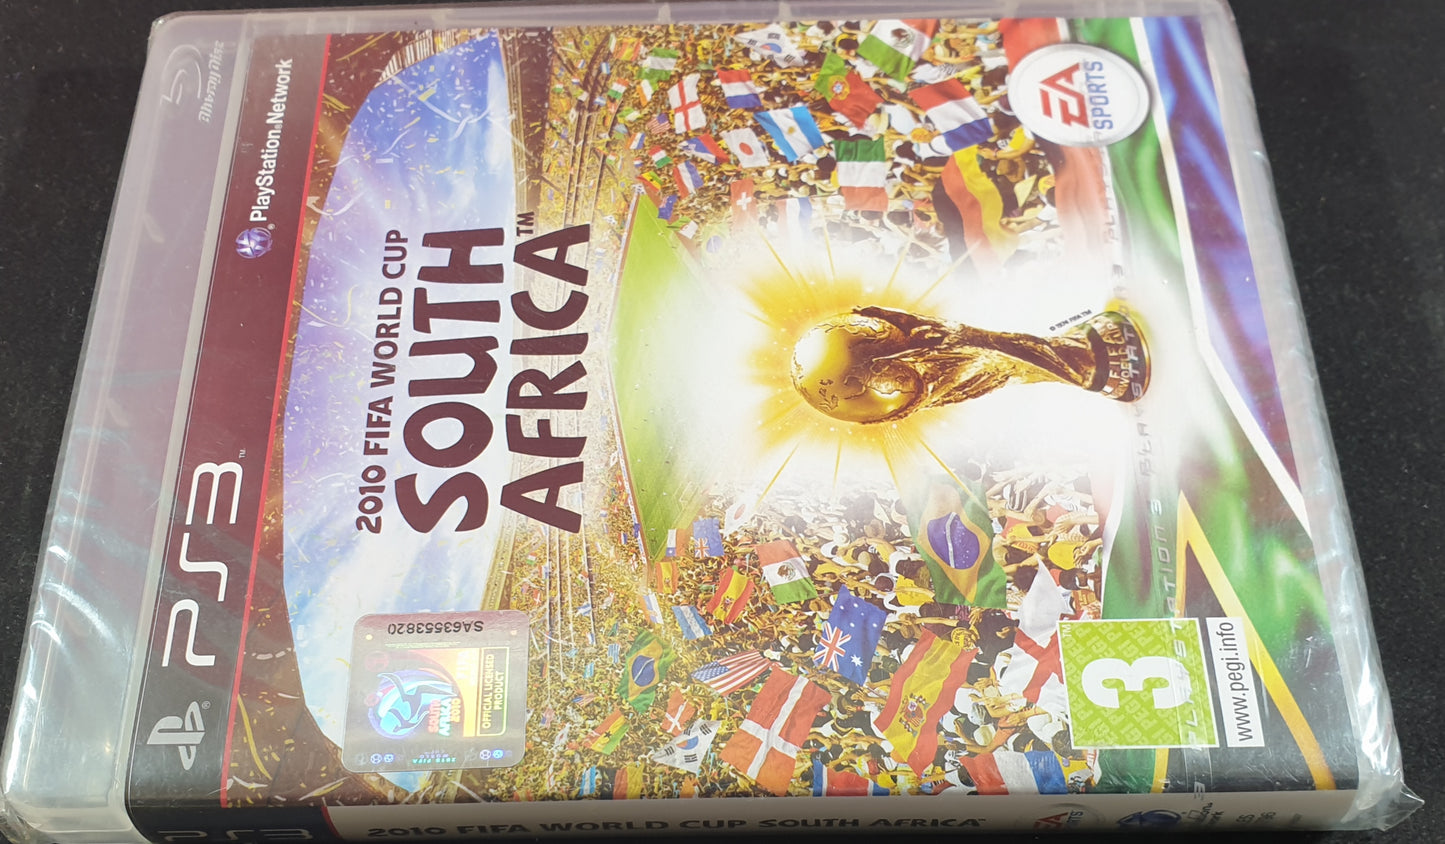 Brand New and Sealed 2010 FIFA World Cup South Africa Sony Playstation 3 (PS3) Game